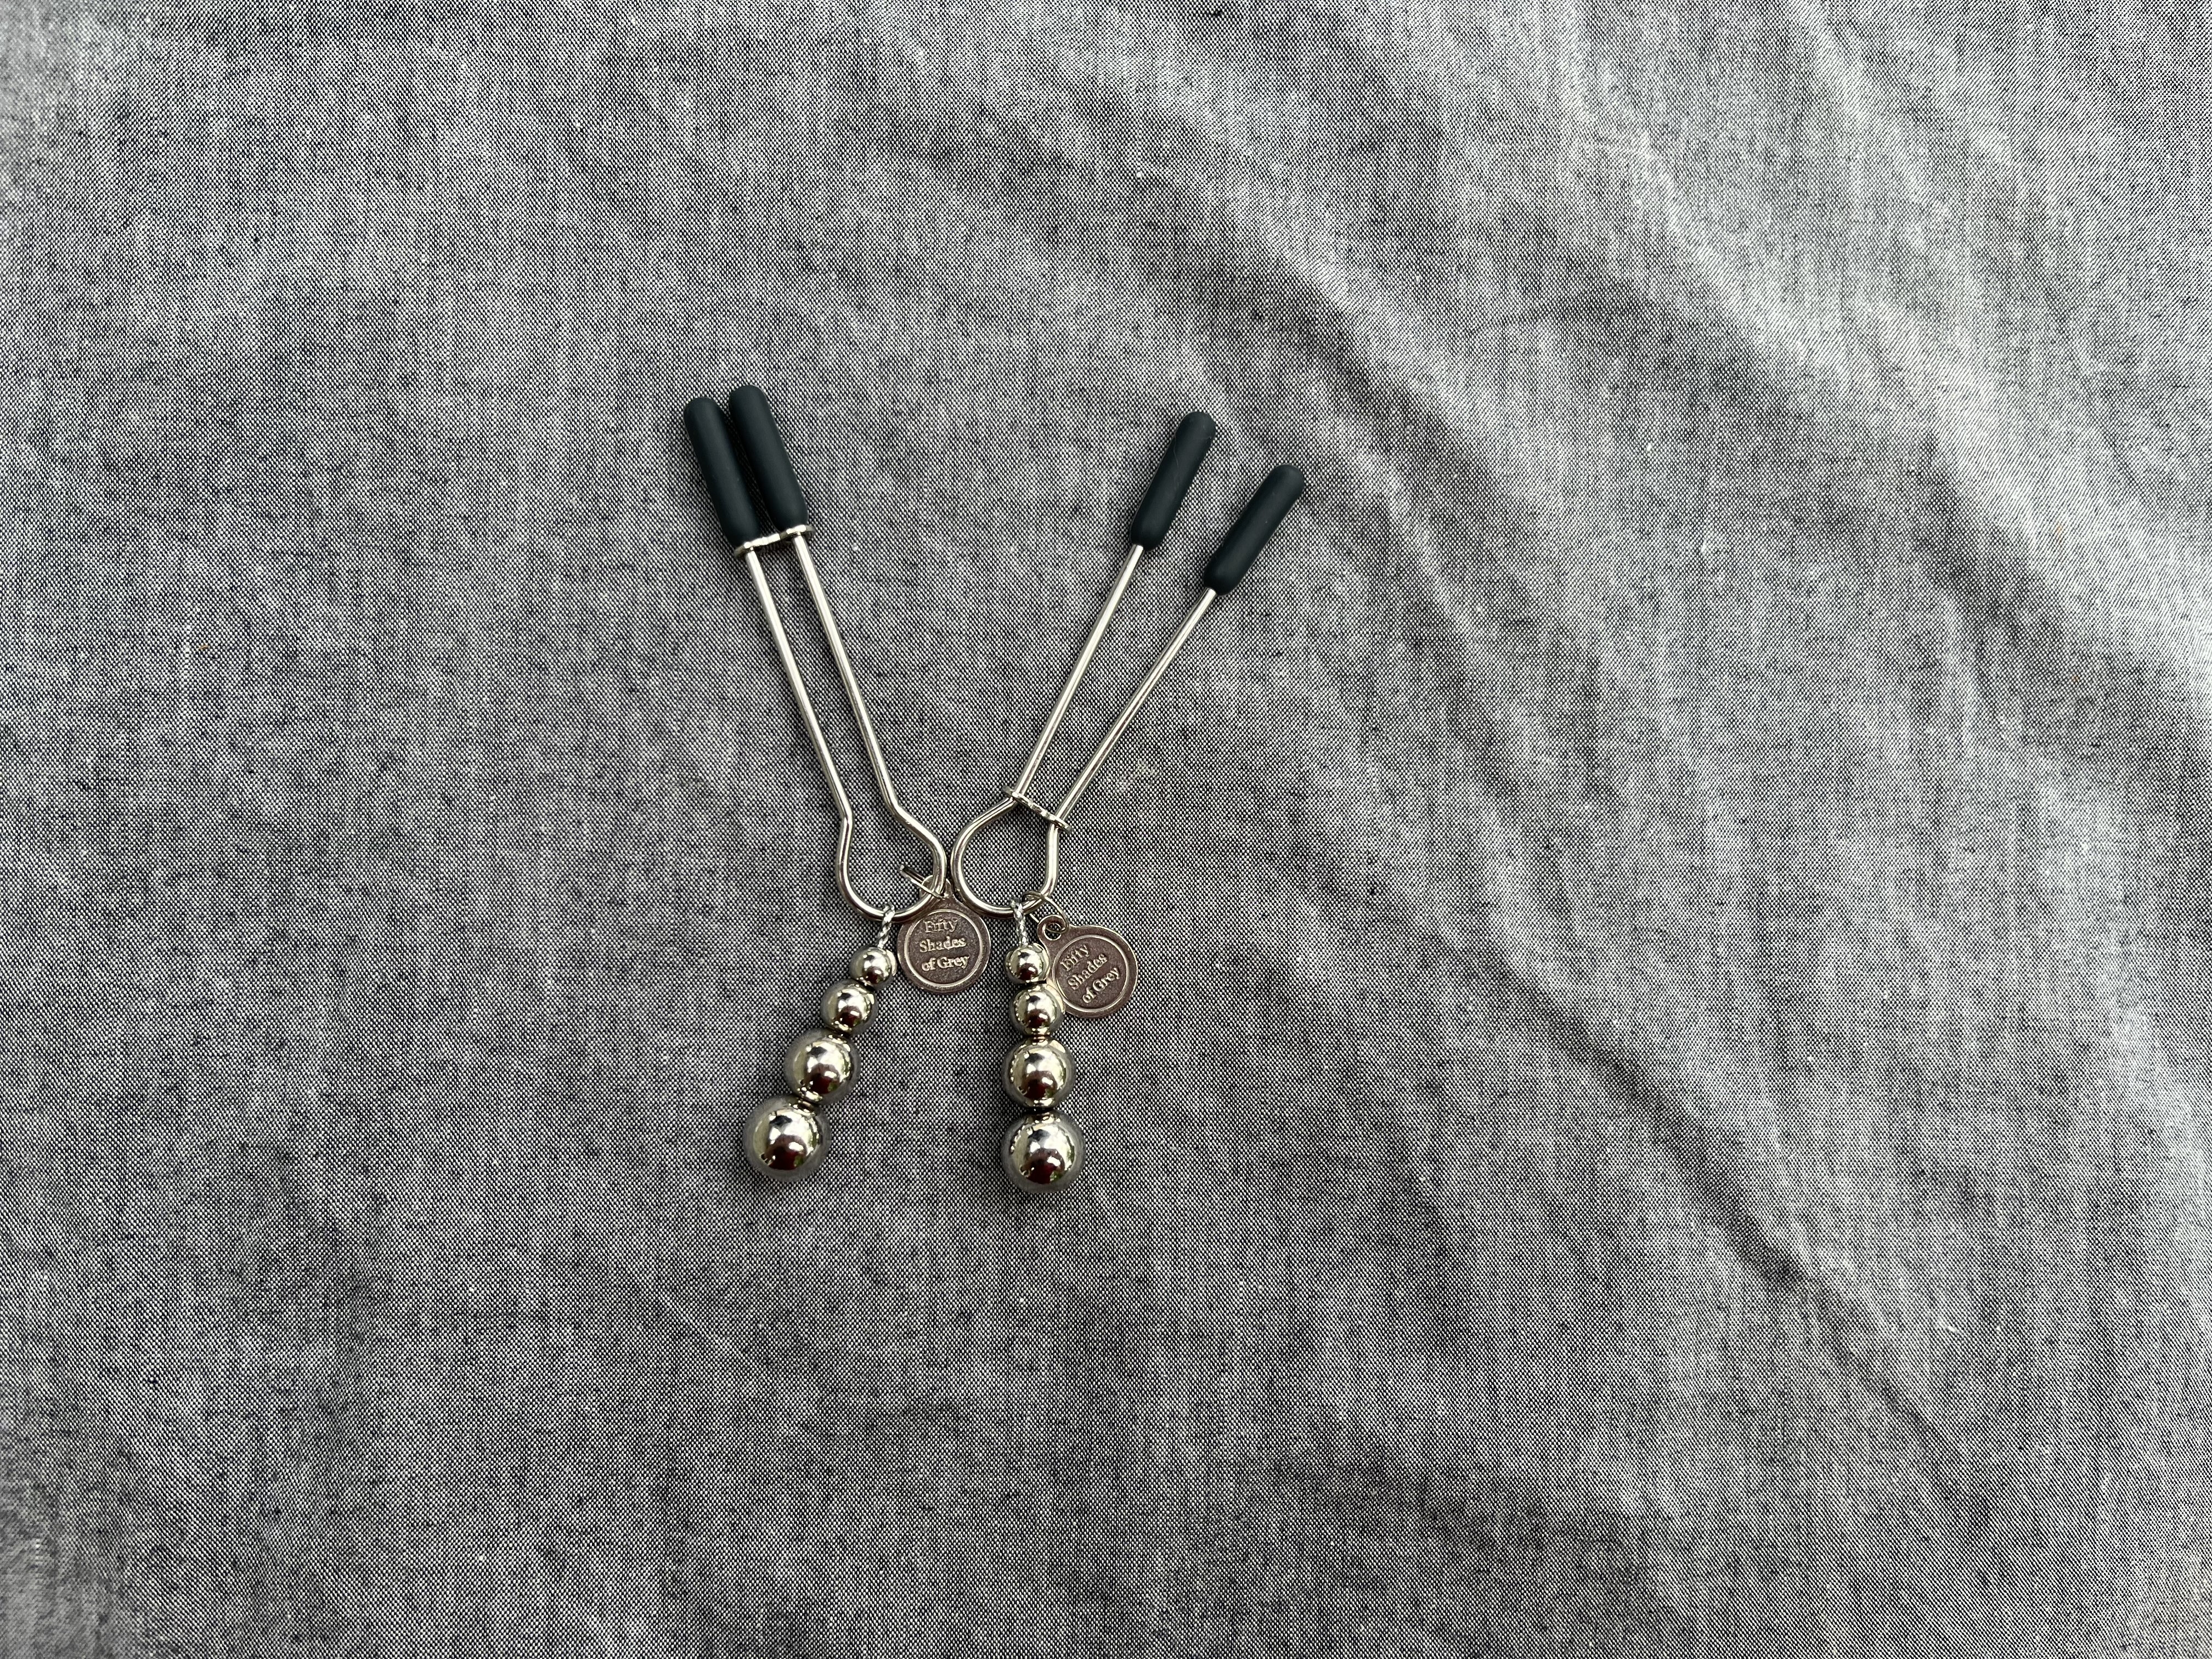 Fifty Shades of Grey The Pinch Adjustable Nipple Clamps. Slide 4